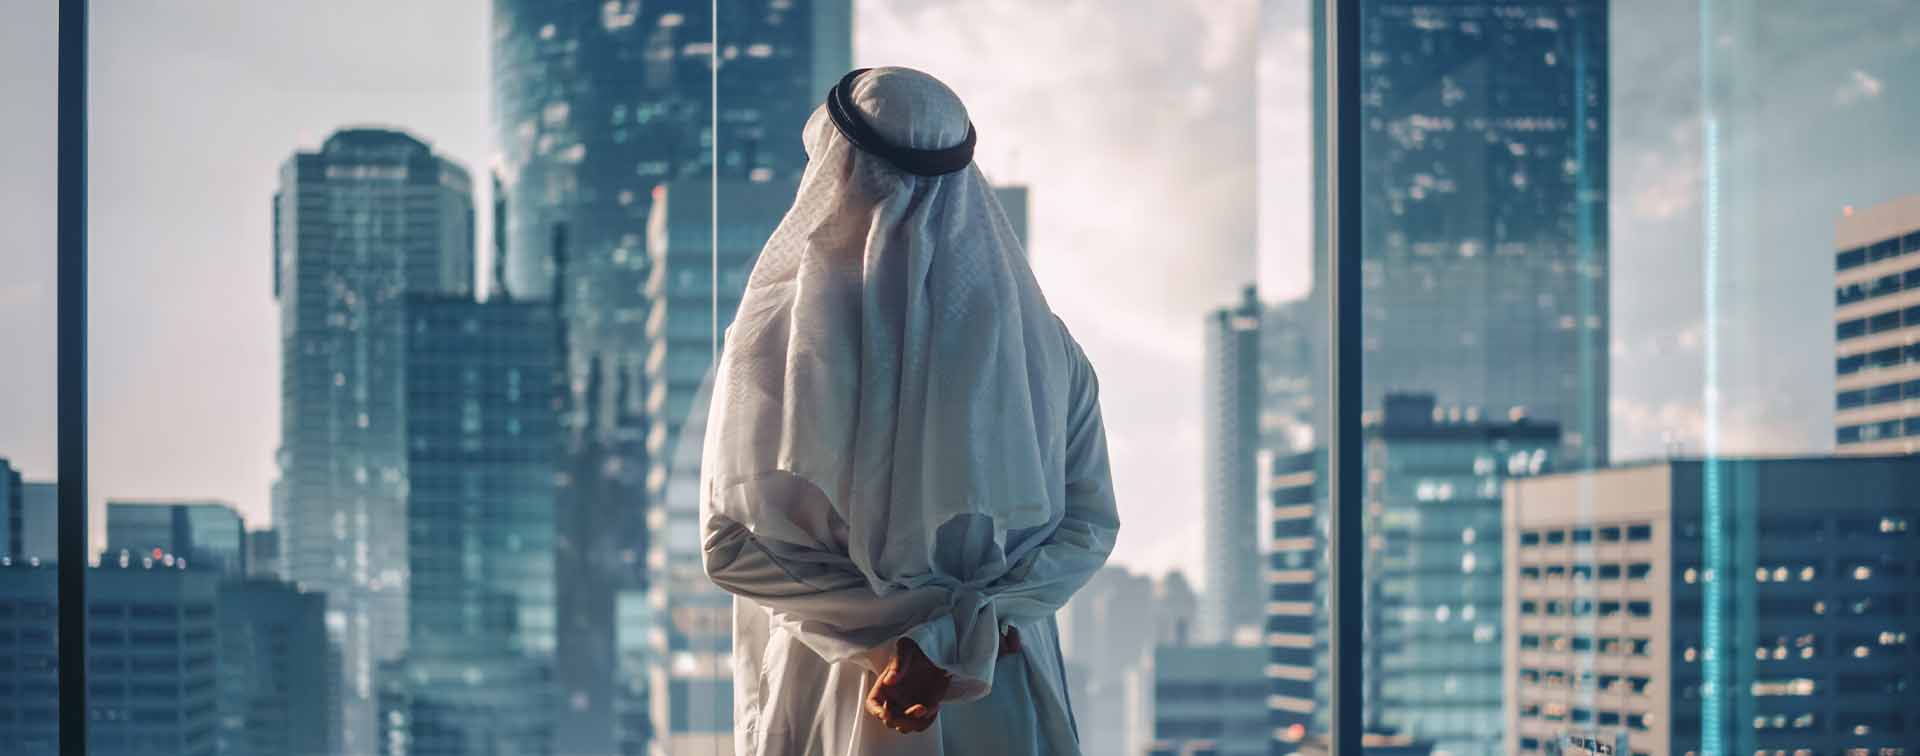 Arab businessman looking at a skyline contemplatively through a window